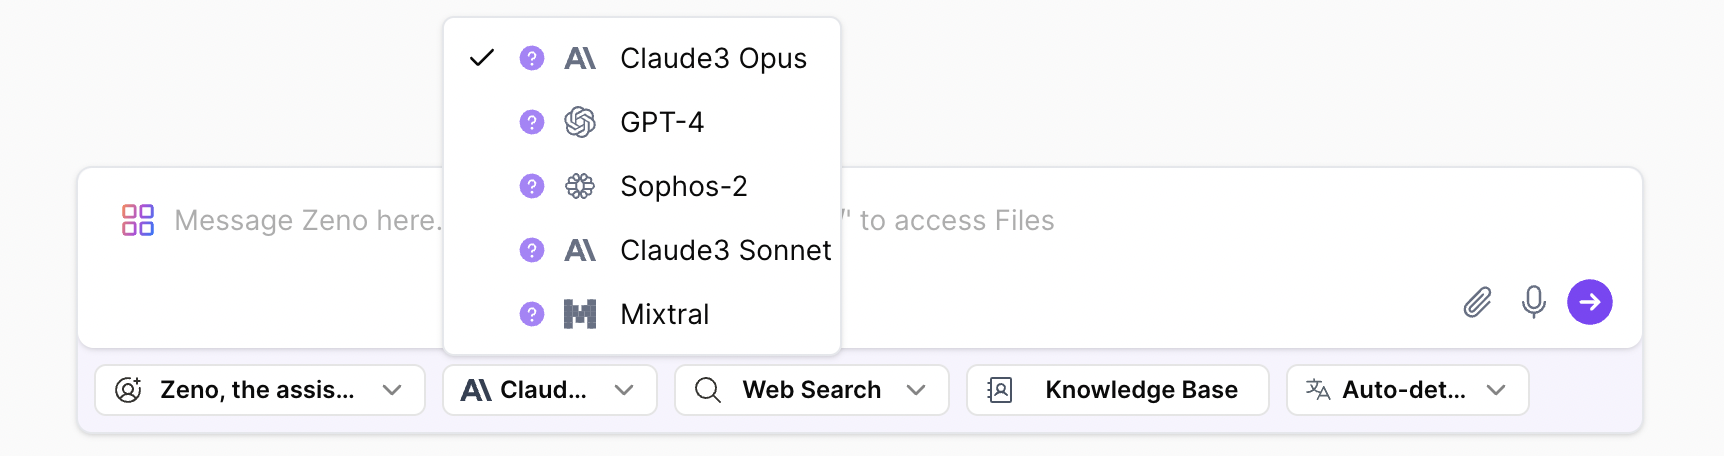 how to access claude 3